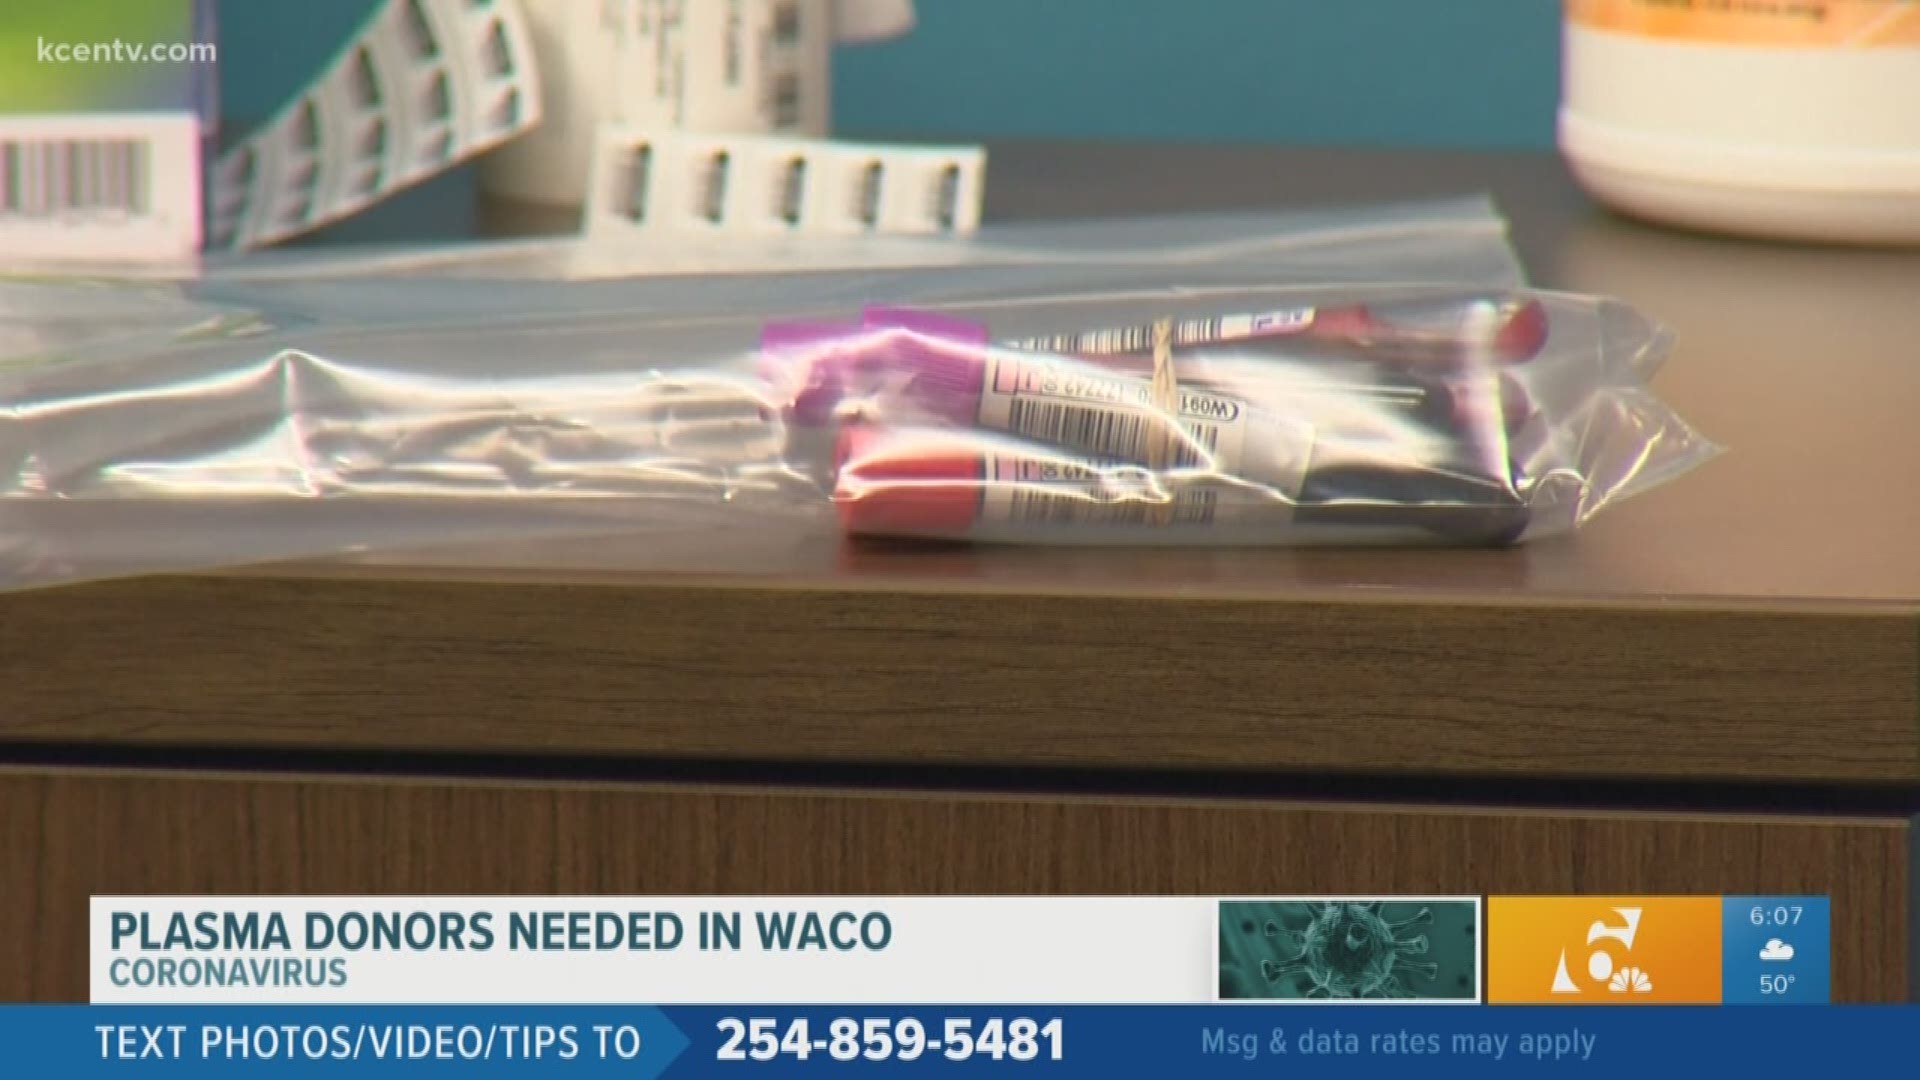 Plasma donors are needed in Waco.